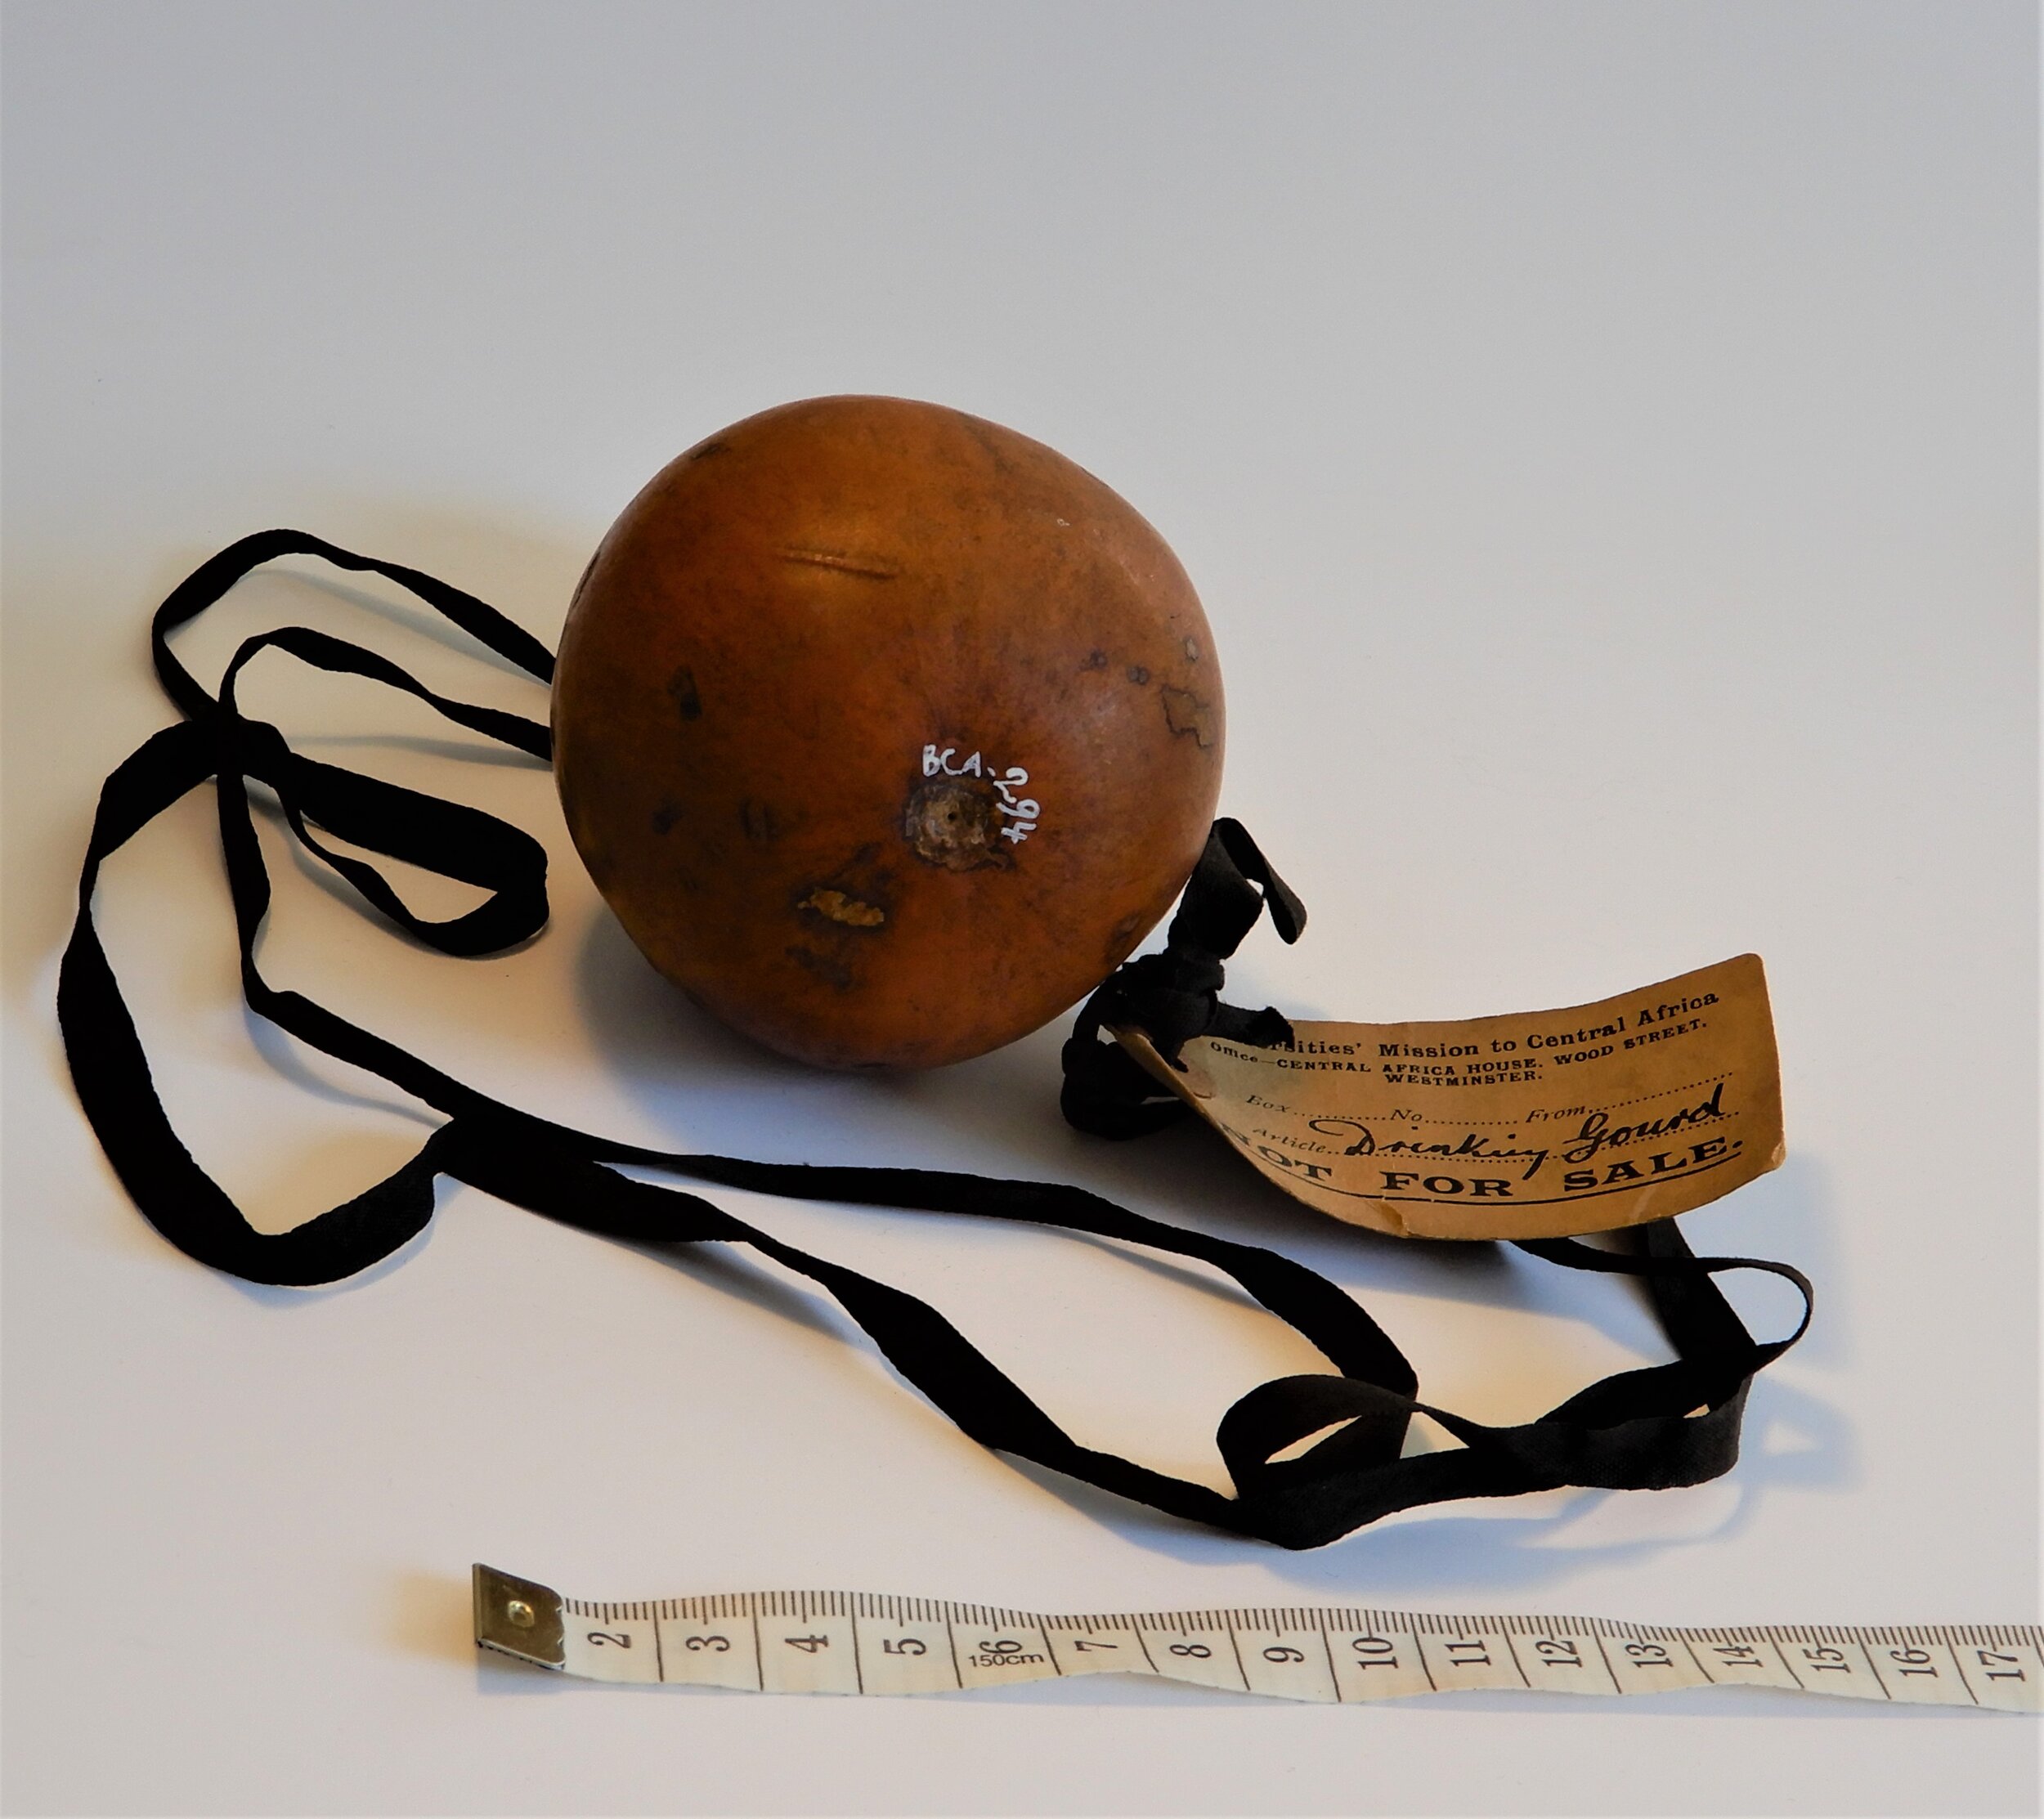  A medium brown gourd viewed from the base. In the photo there is an old-fashioned measuring tape closer to the viewer. 